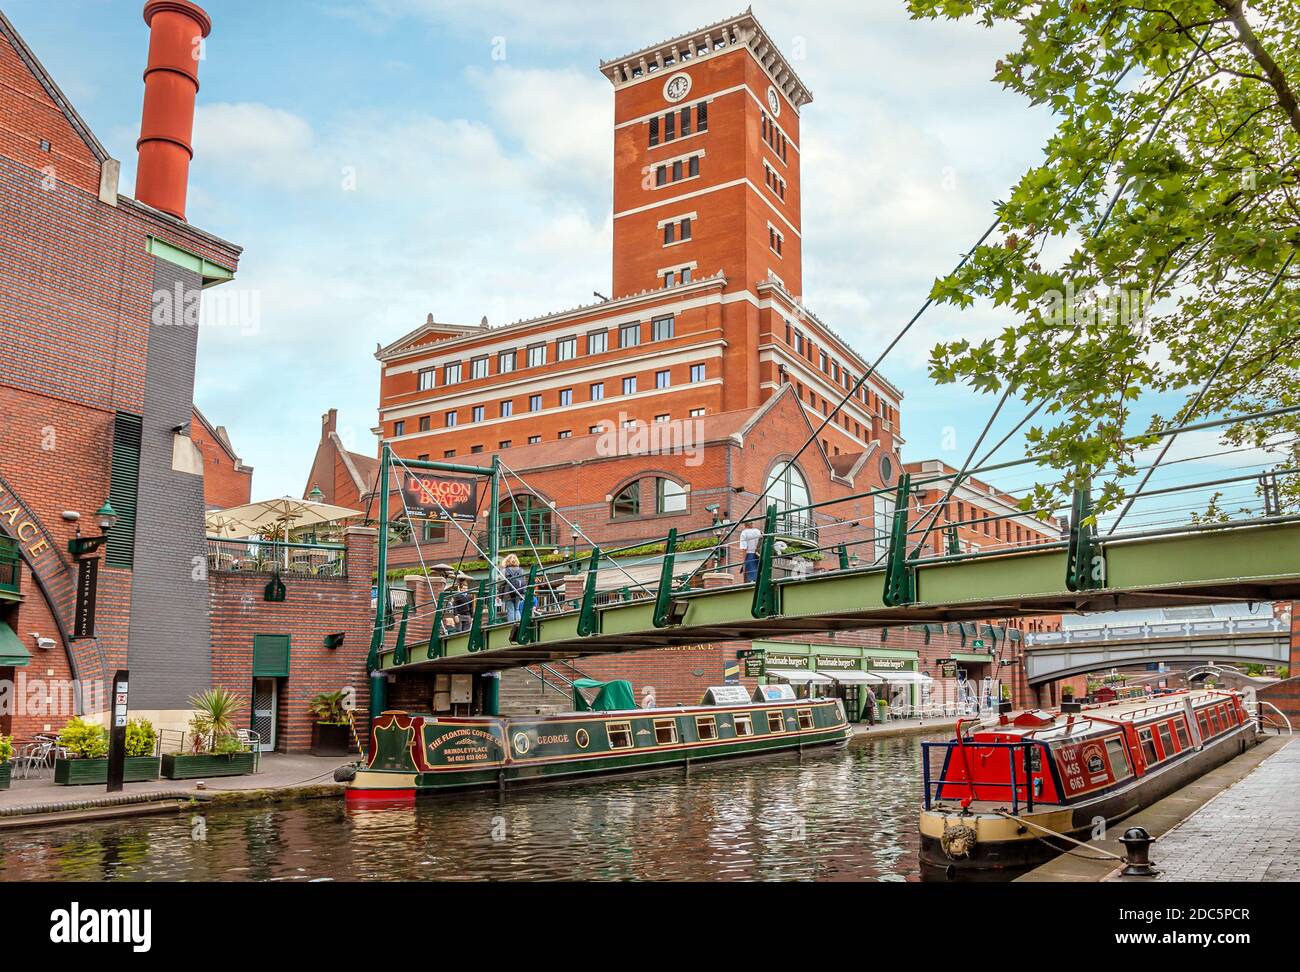 Narrow Boat Marina at Brindley Place, a canal basin in the centre of Birmingham, England Stock Photo